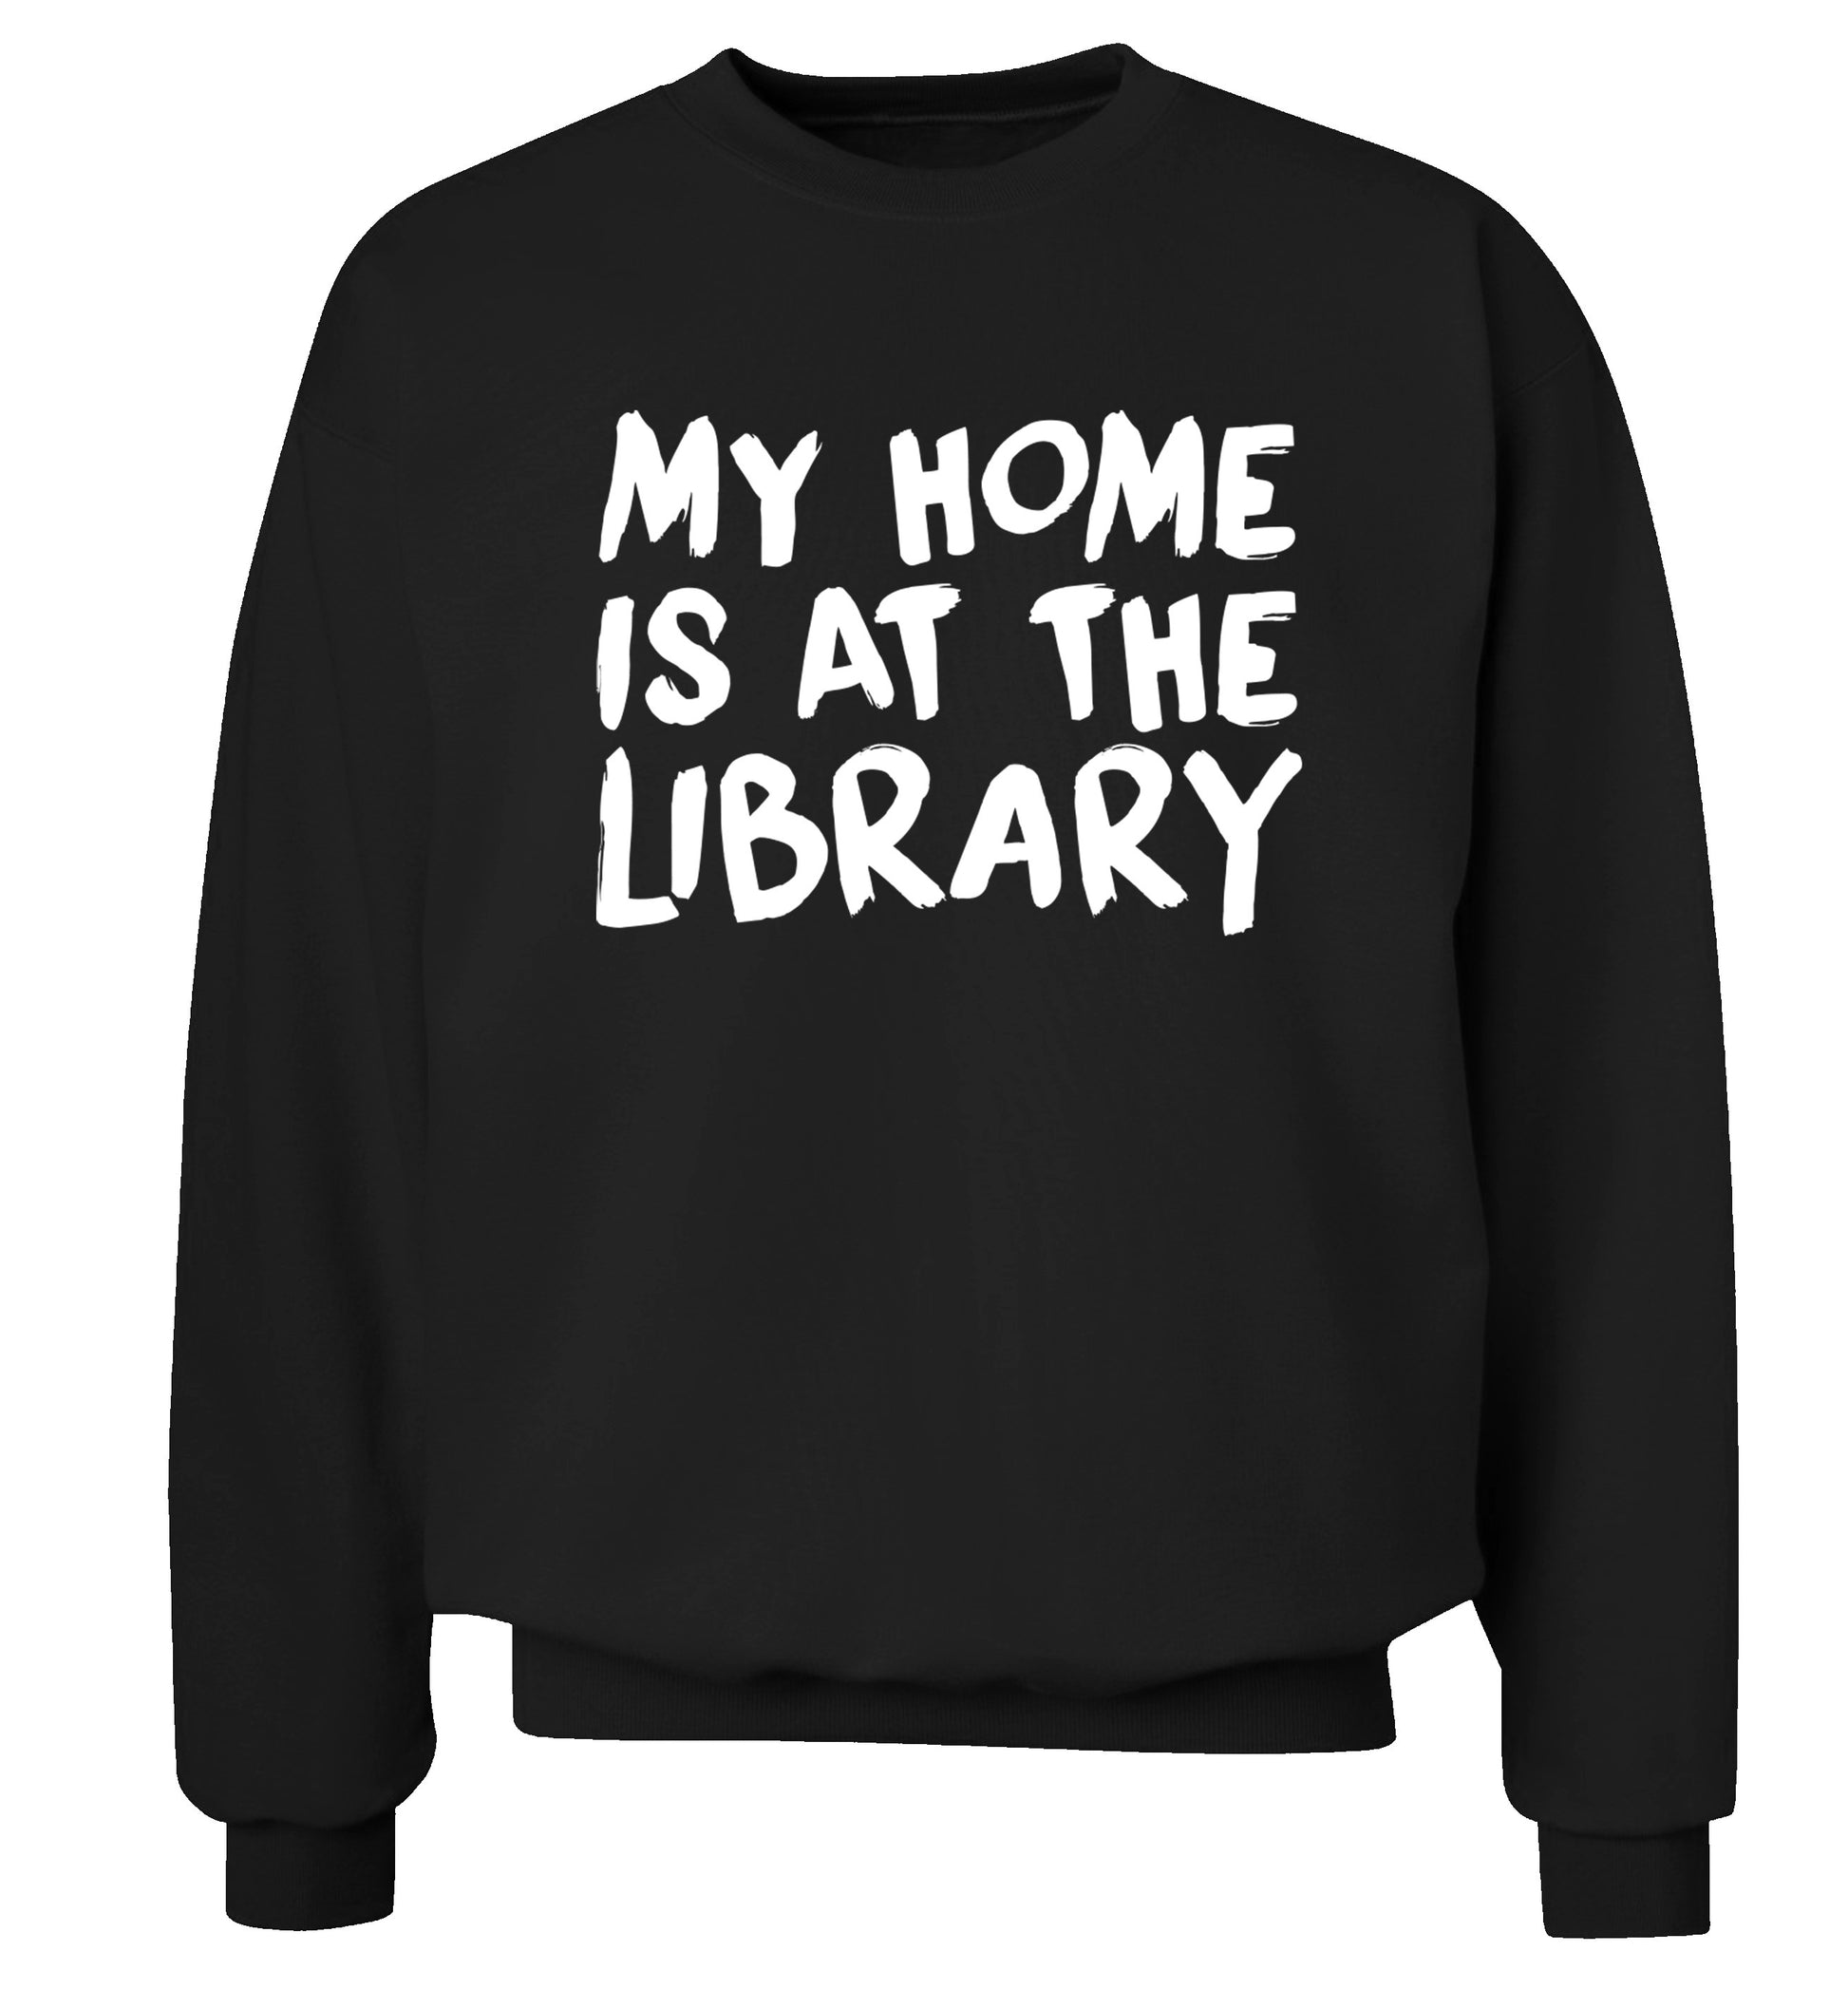 My home is at the library Adult's unisex black Sweater 2XL